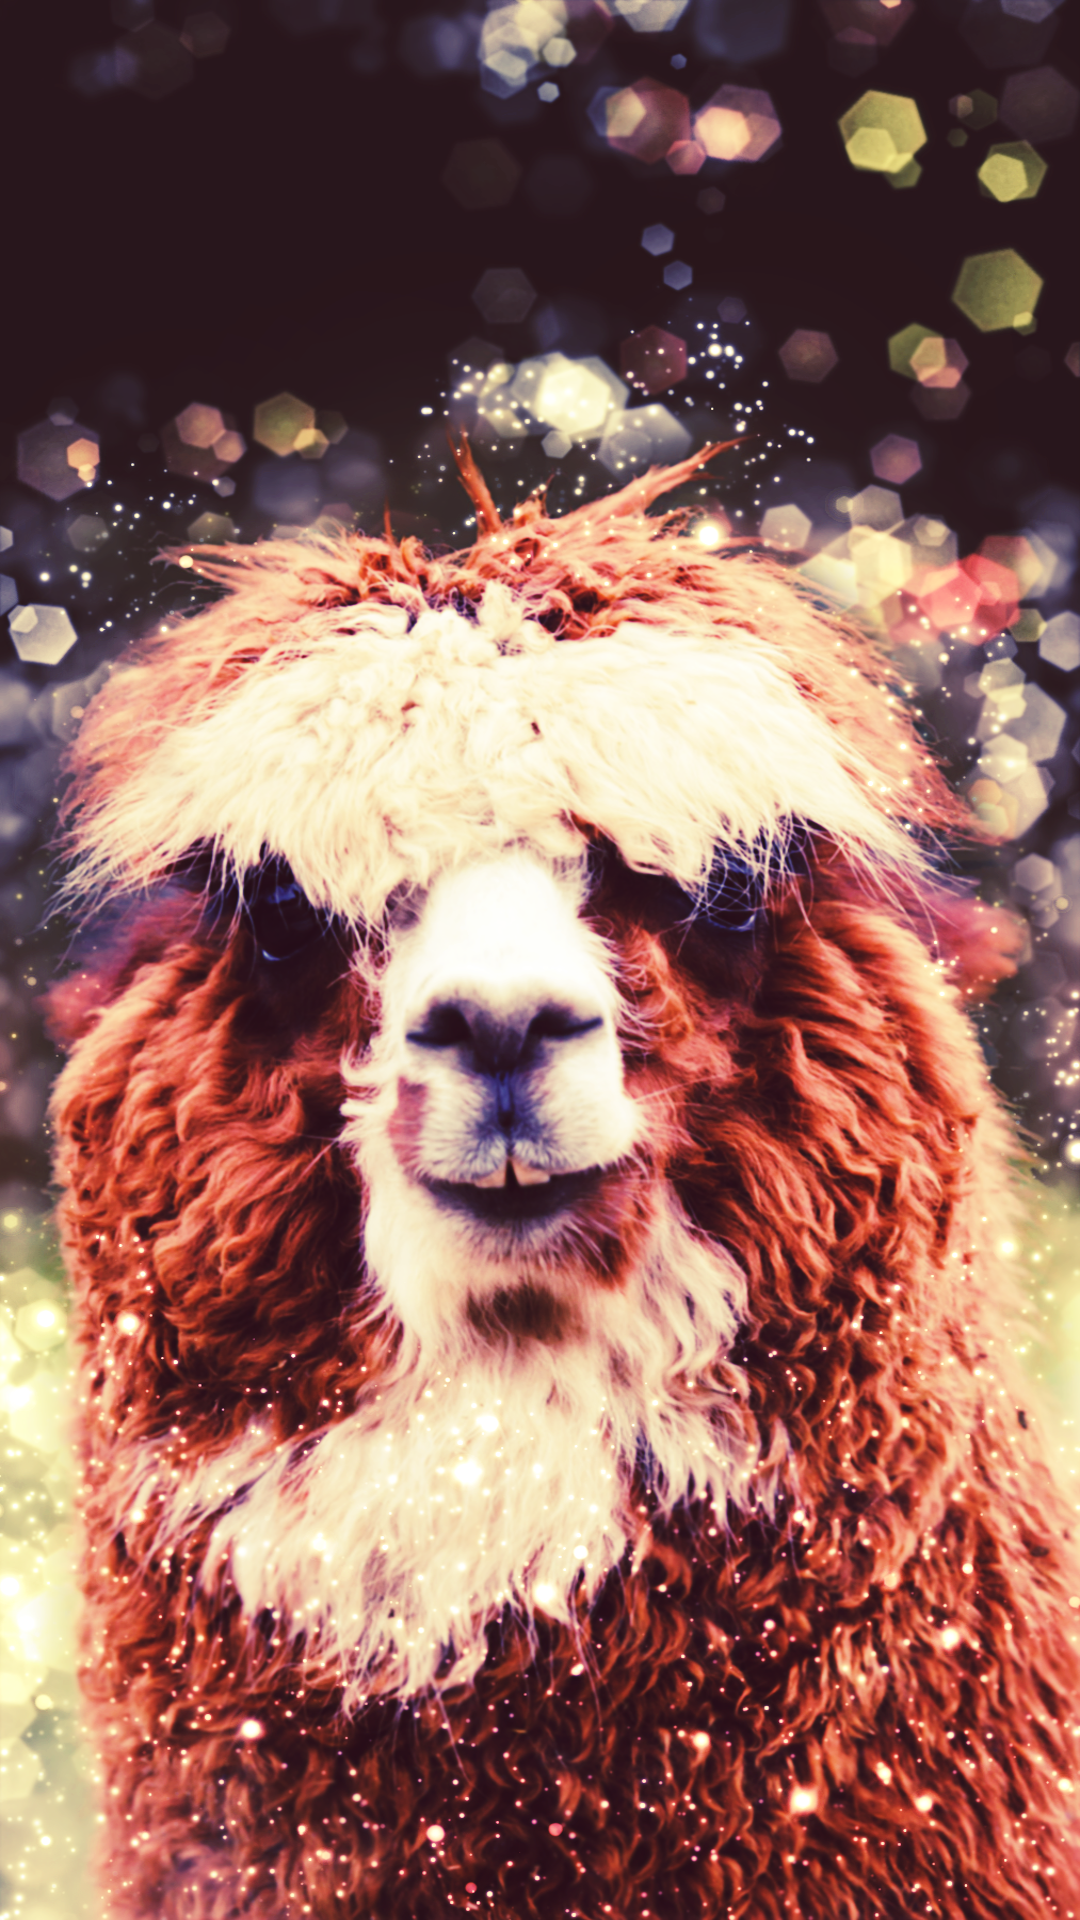 Funny Llama [1080x1920] + live wallpaper in comments | Scrolller